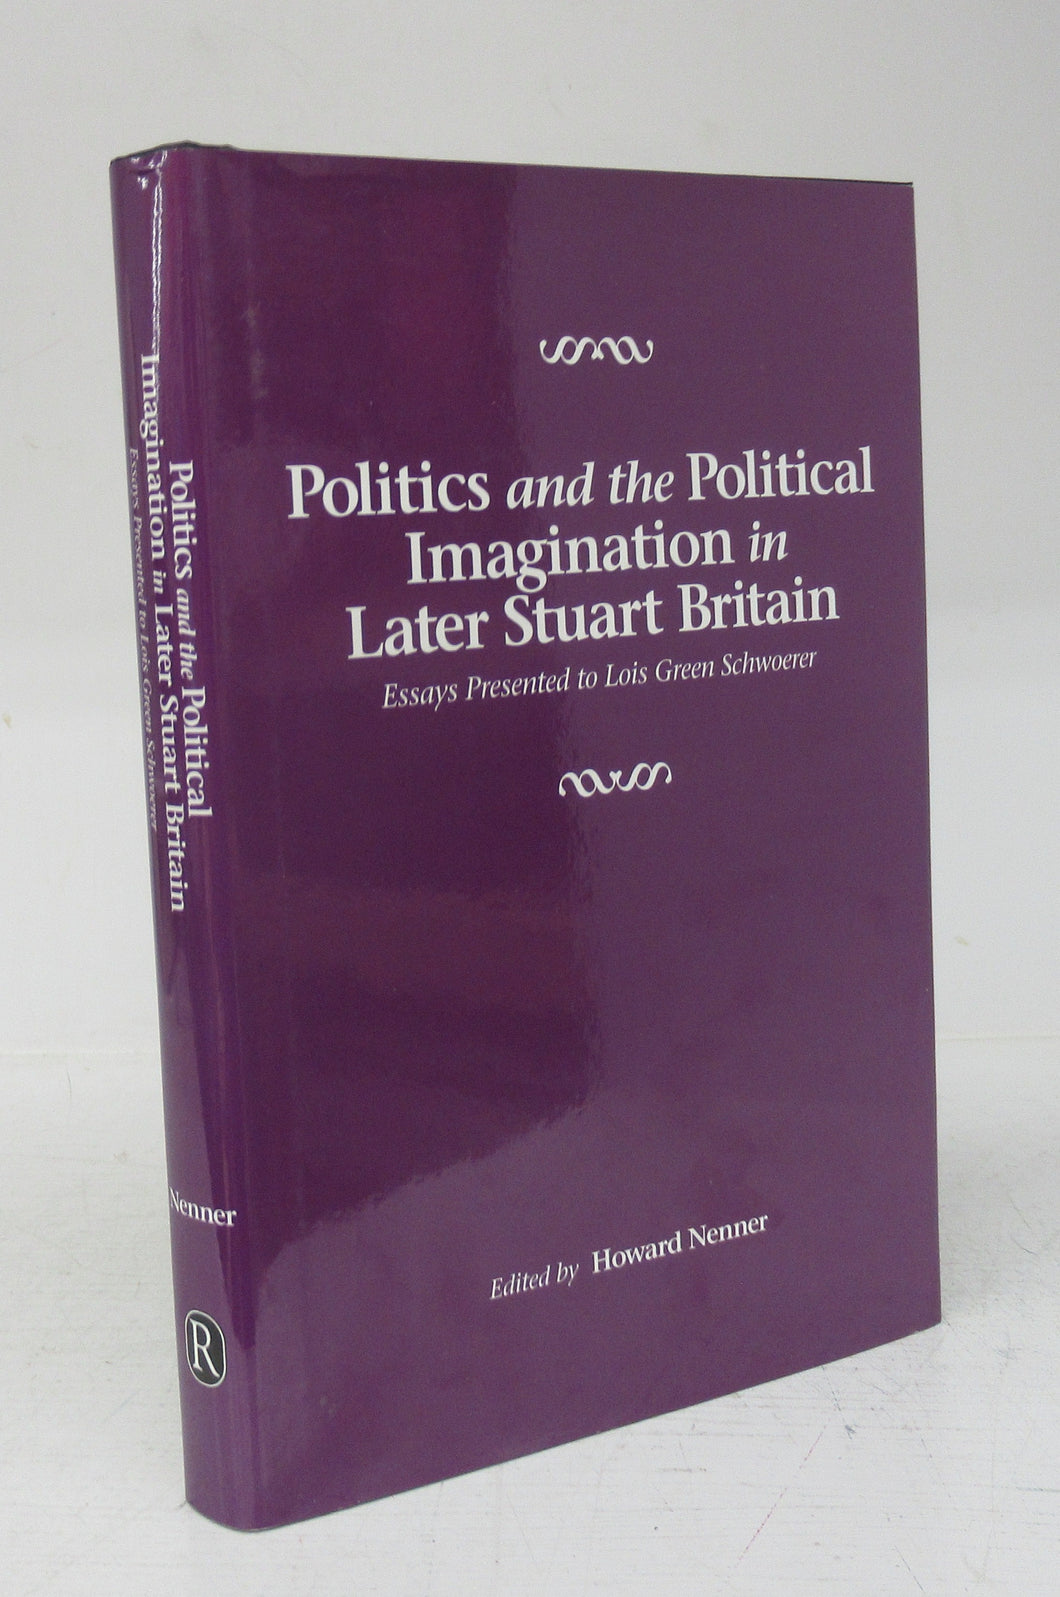 Politics and the Political Imagination in Later Stuart Britain: Essays Presented to Lois Green Schwoerer